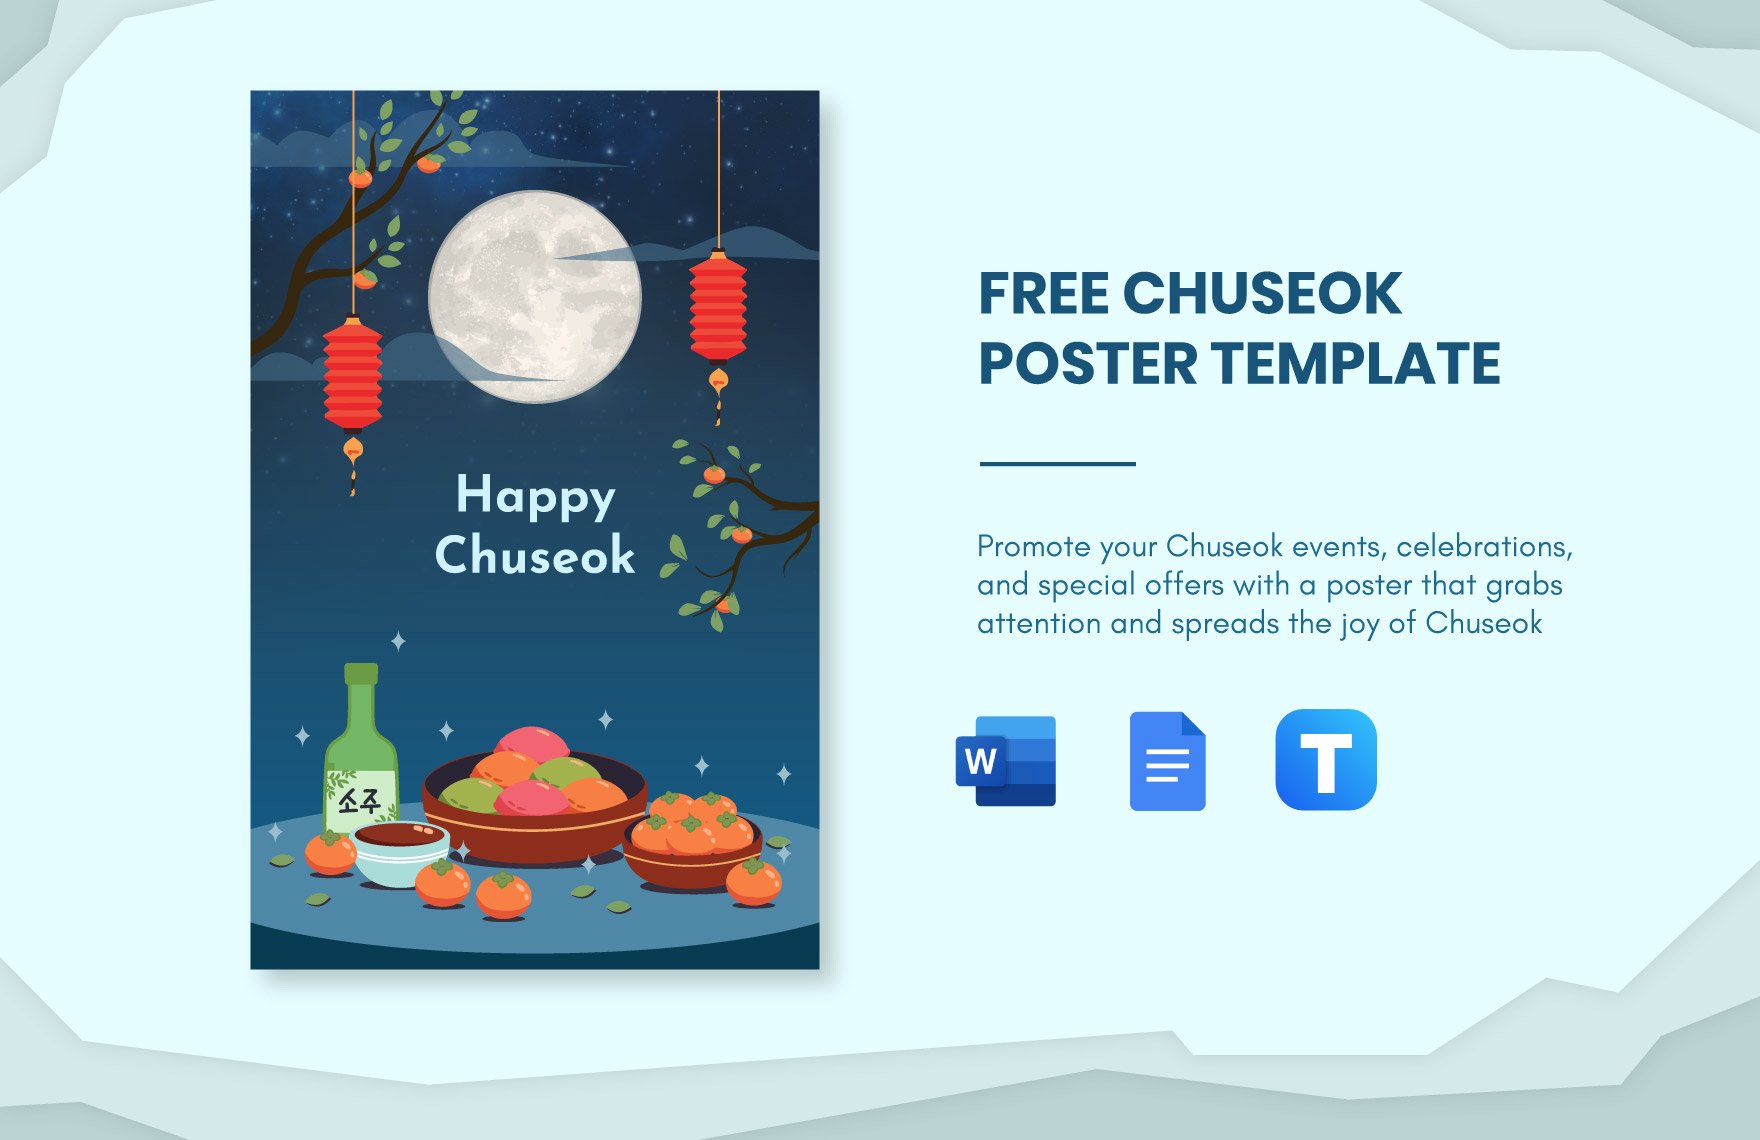 Free Chuseok Poster Template in Word, Google Docs